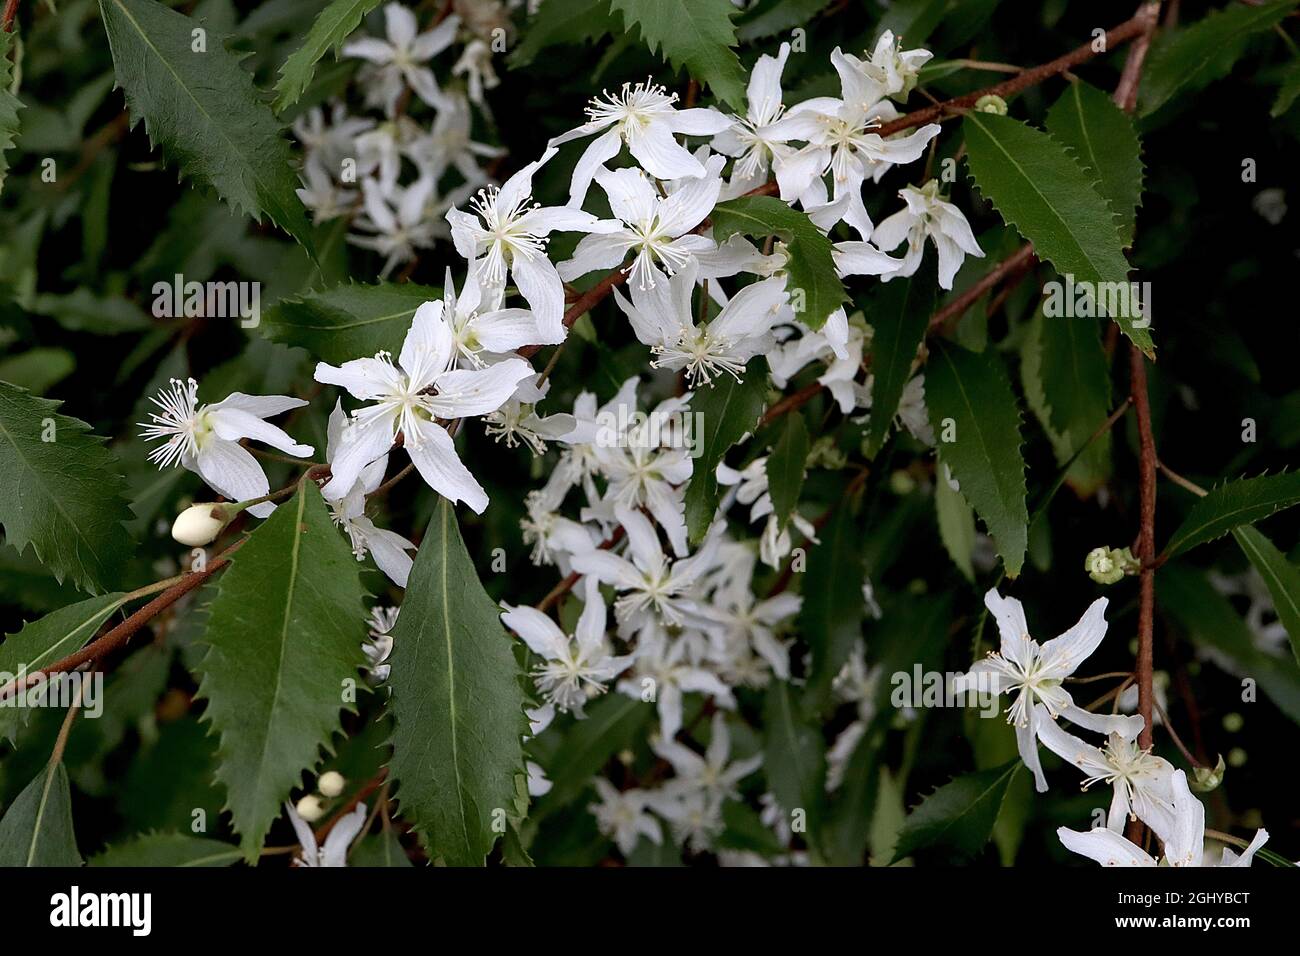 Hoheria sexstylosa Ribbonwood – white star-shaped flowers and deep green leaves with sharply toothed margins,  August, England, UK Stock Photo